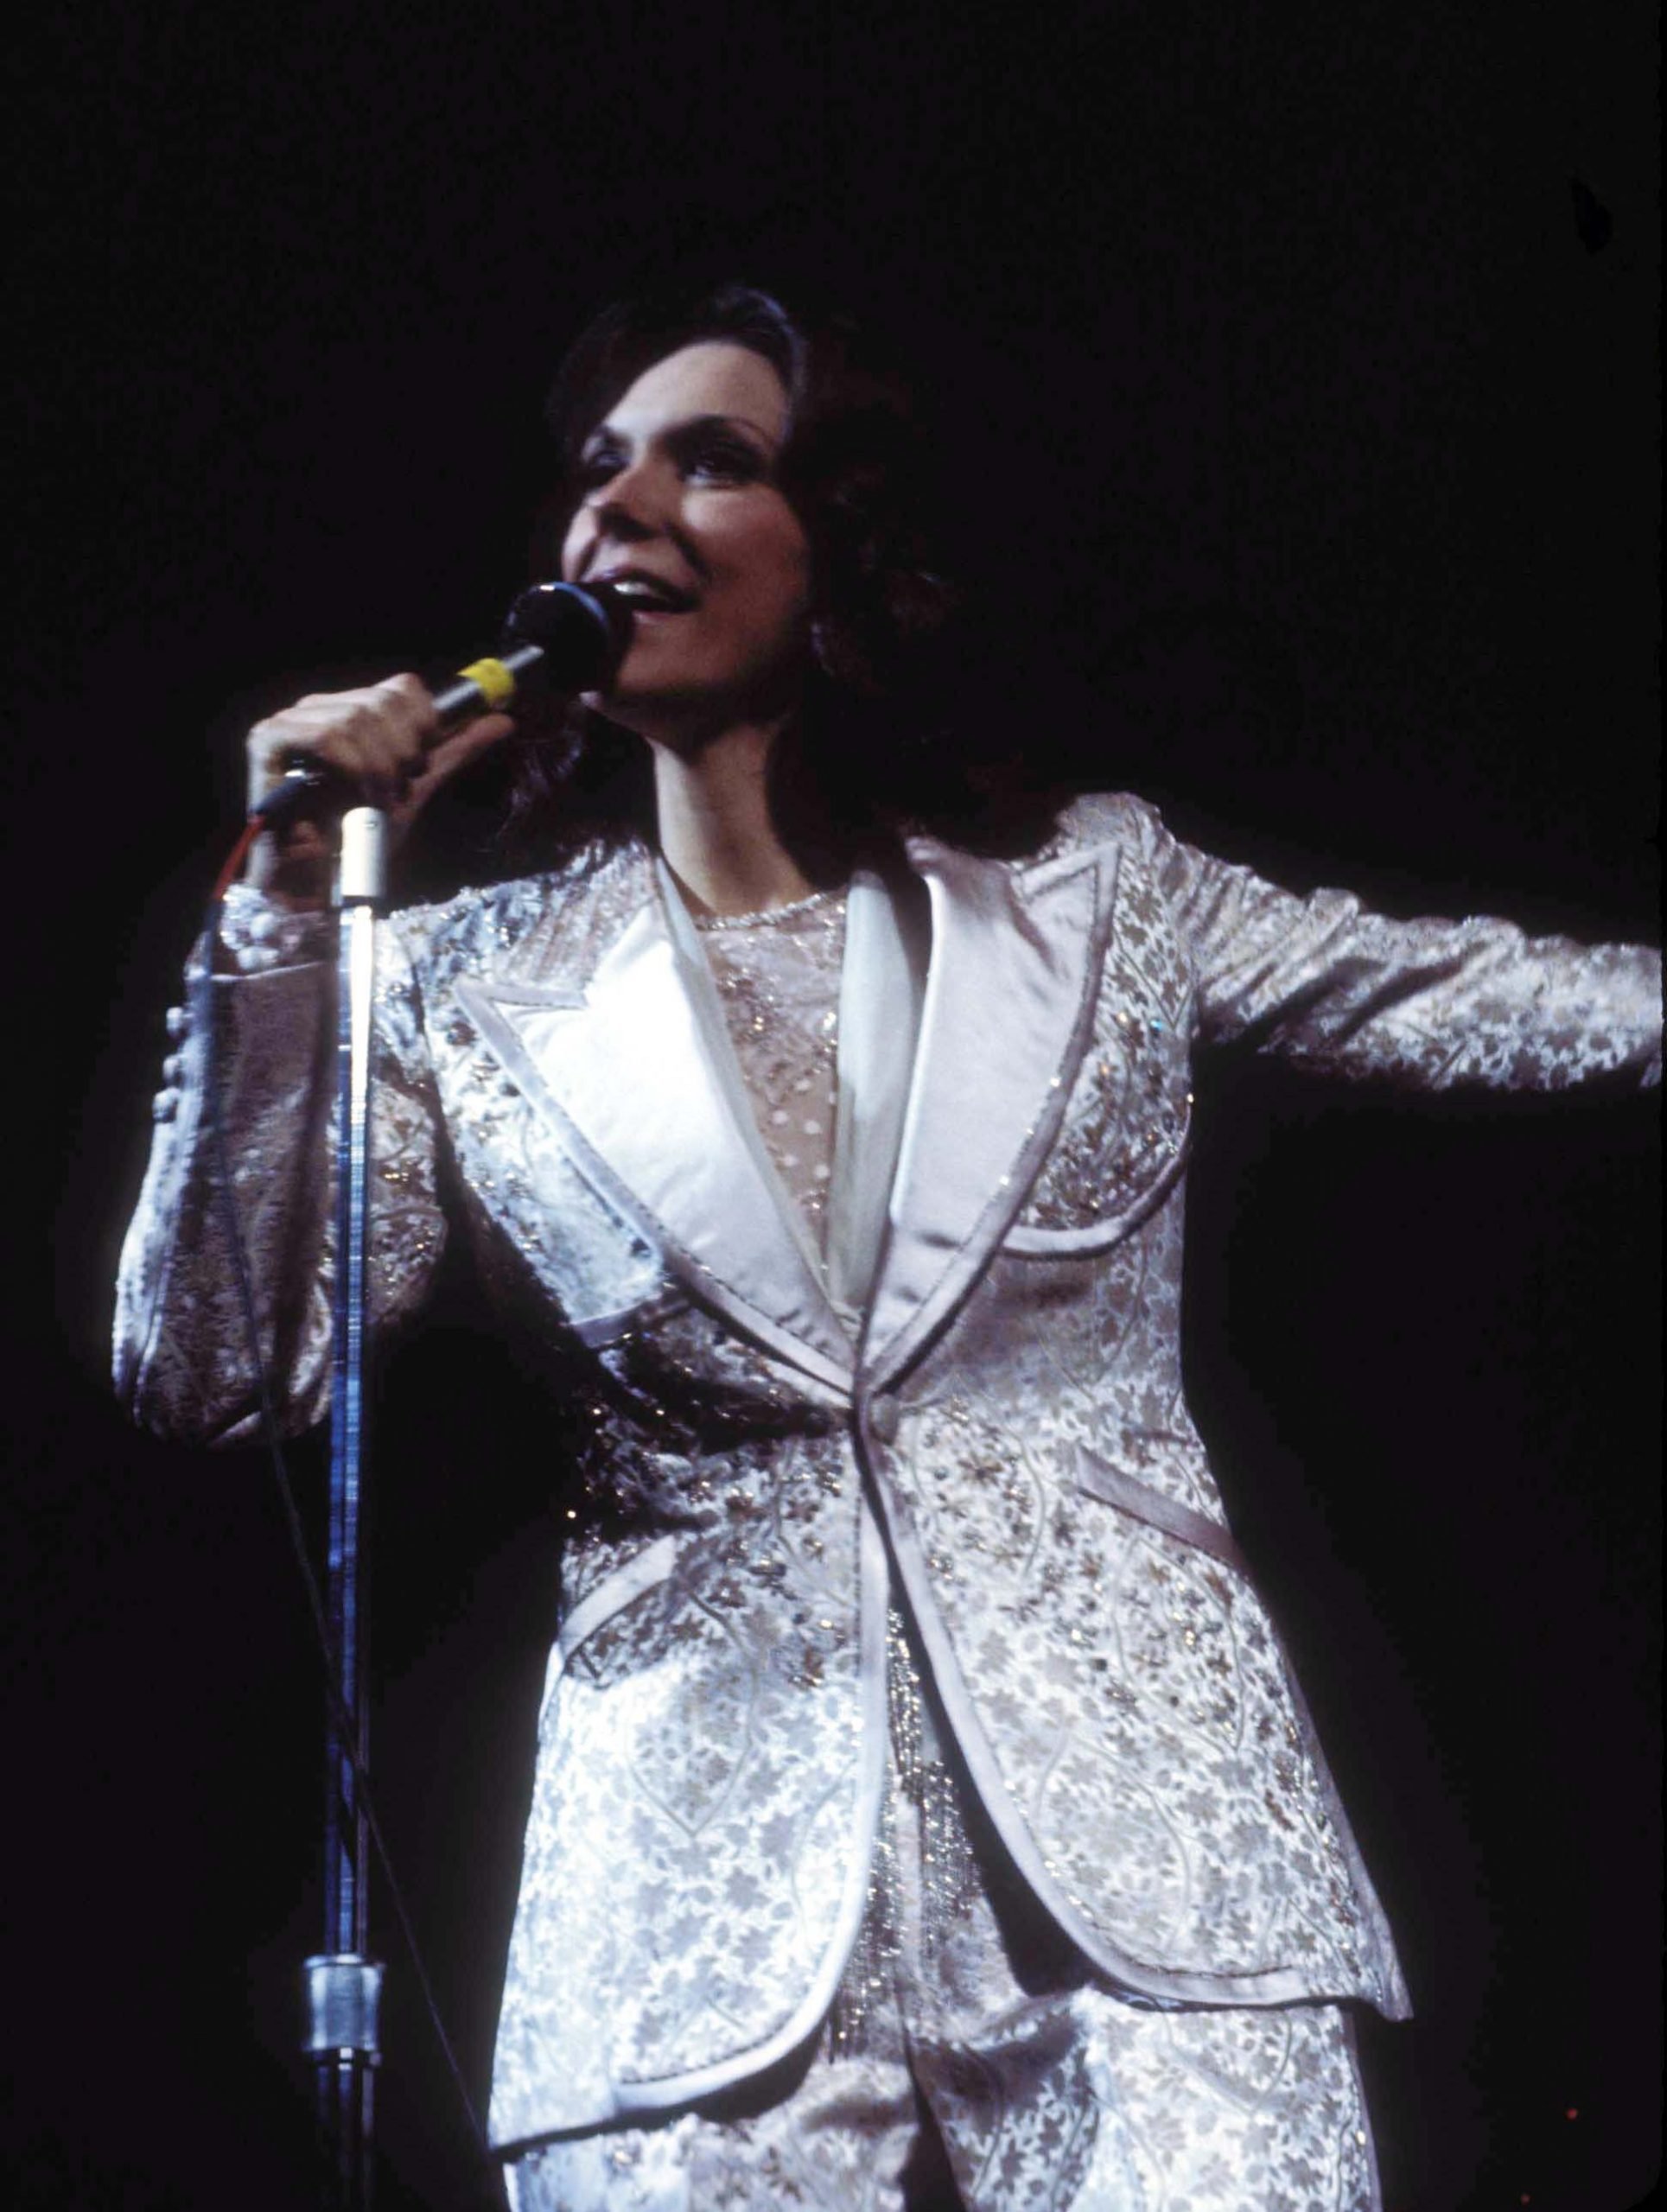 Herb Alpert Played A Role In Helping Produce The Carpenters' '70s Hit "Close To You"